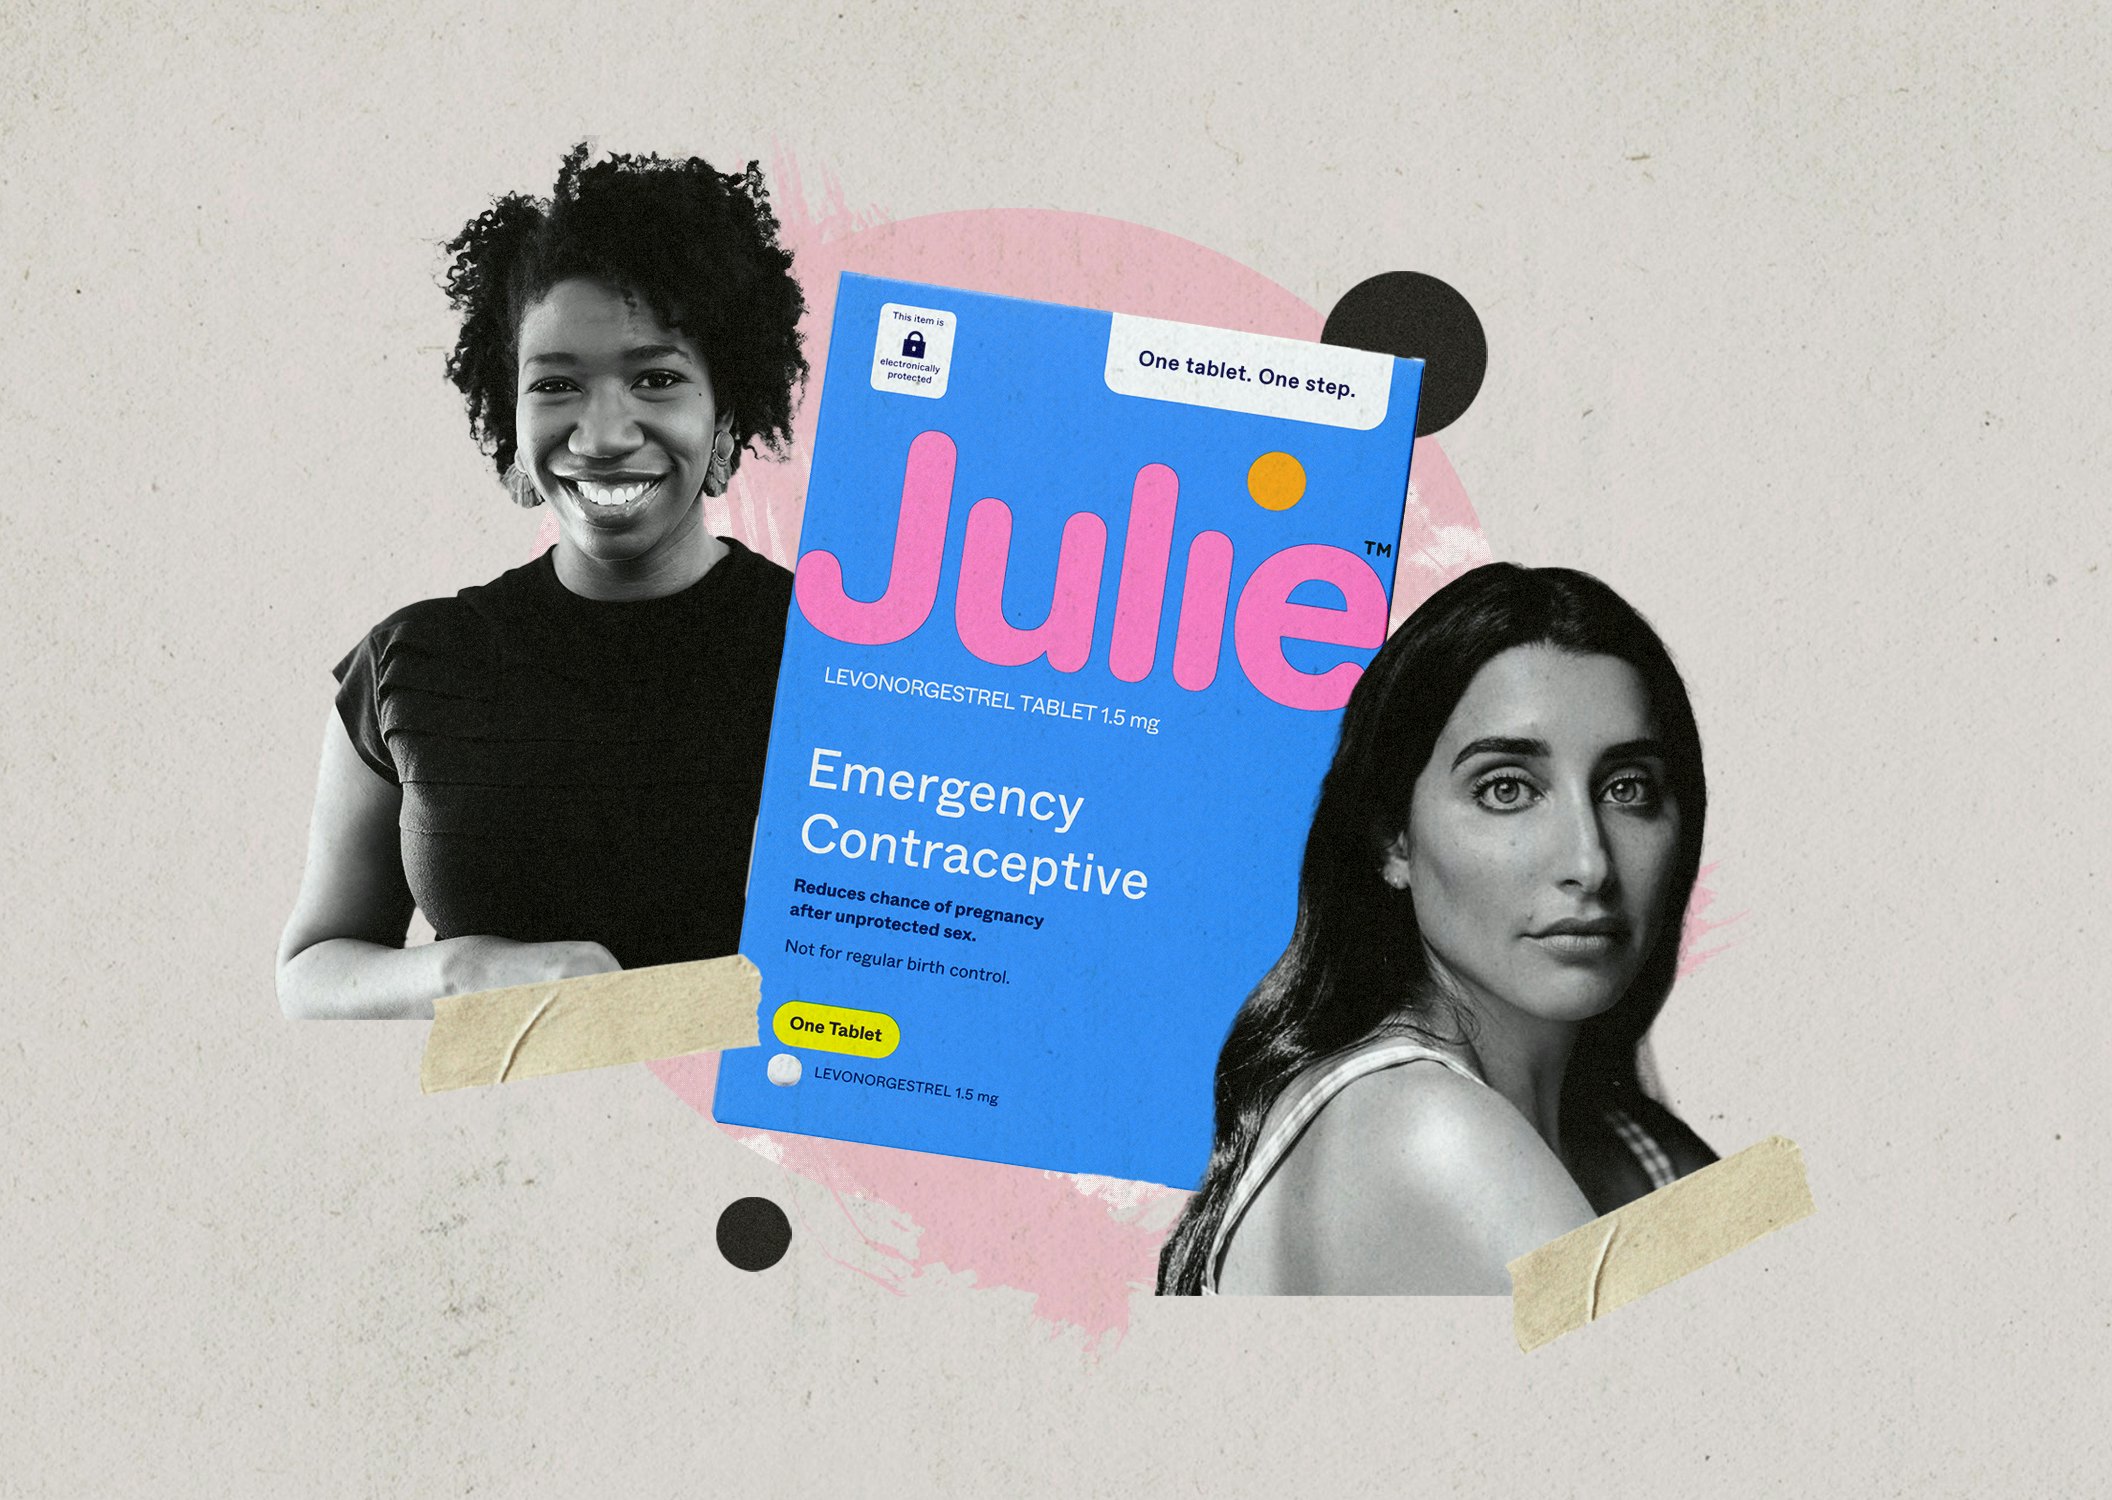 Julie Is A Morning After Pill For Modern Reproductive Health